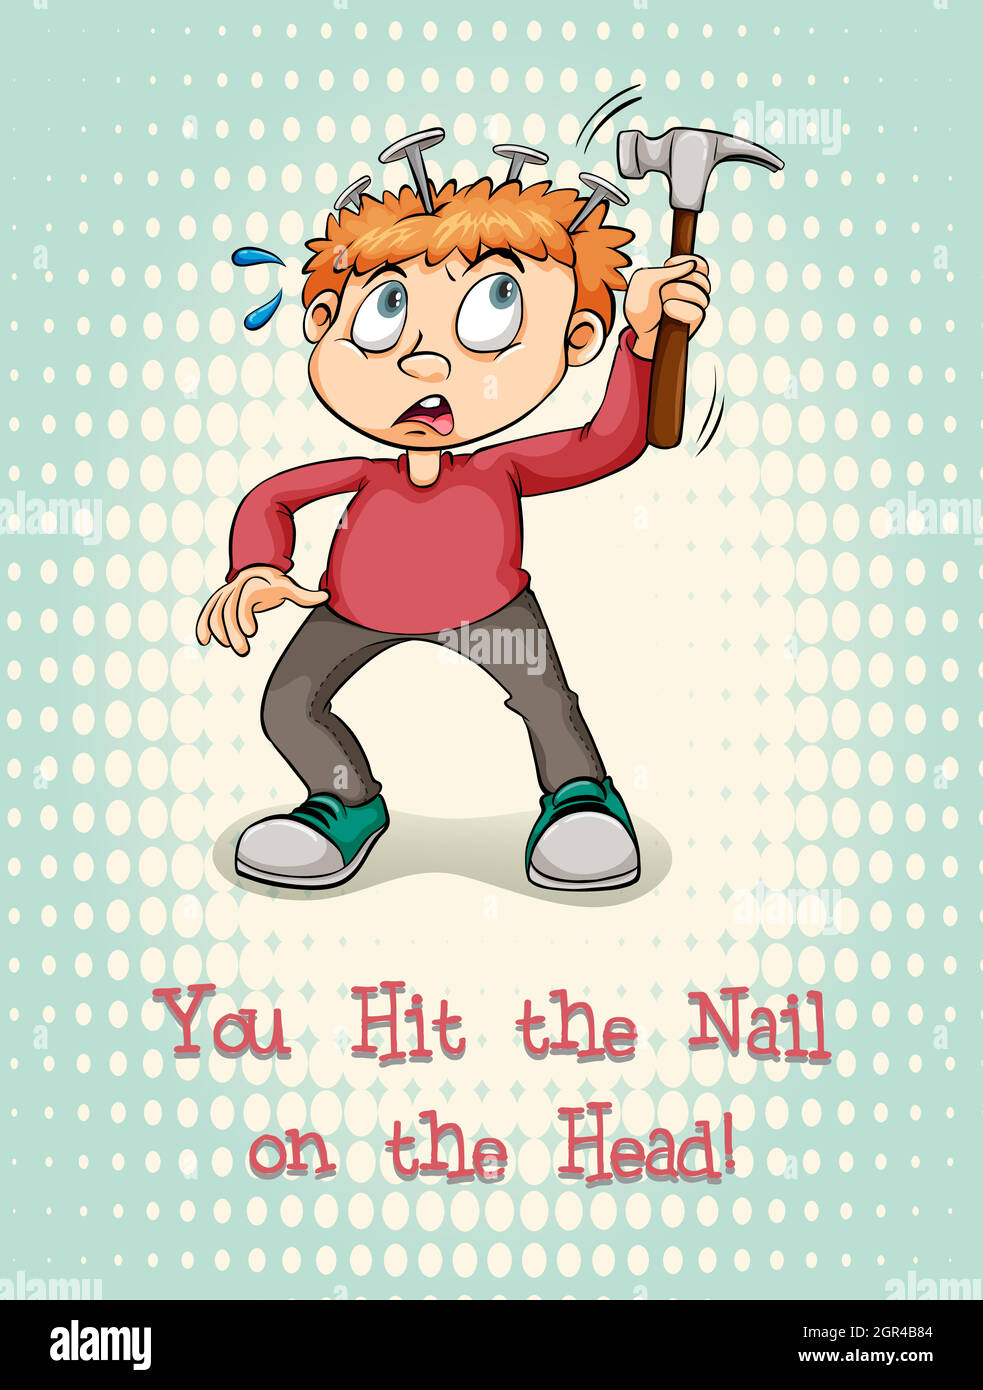 Hit the nail on head idiom Royalty Free Vector Image